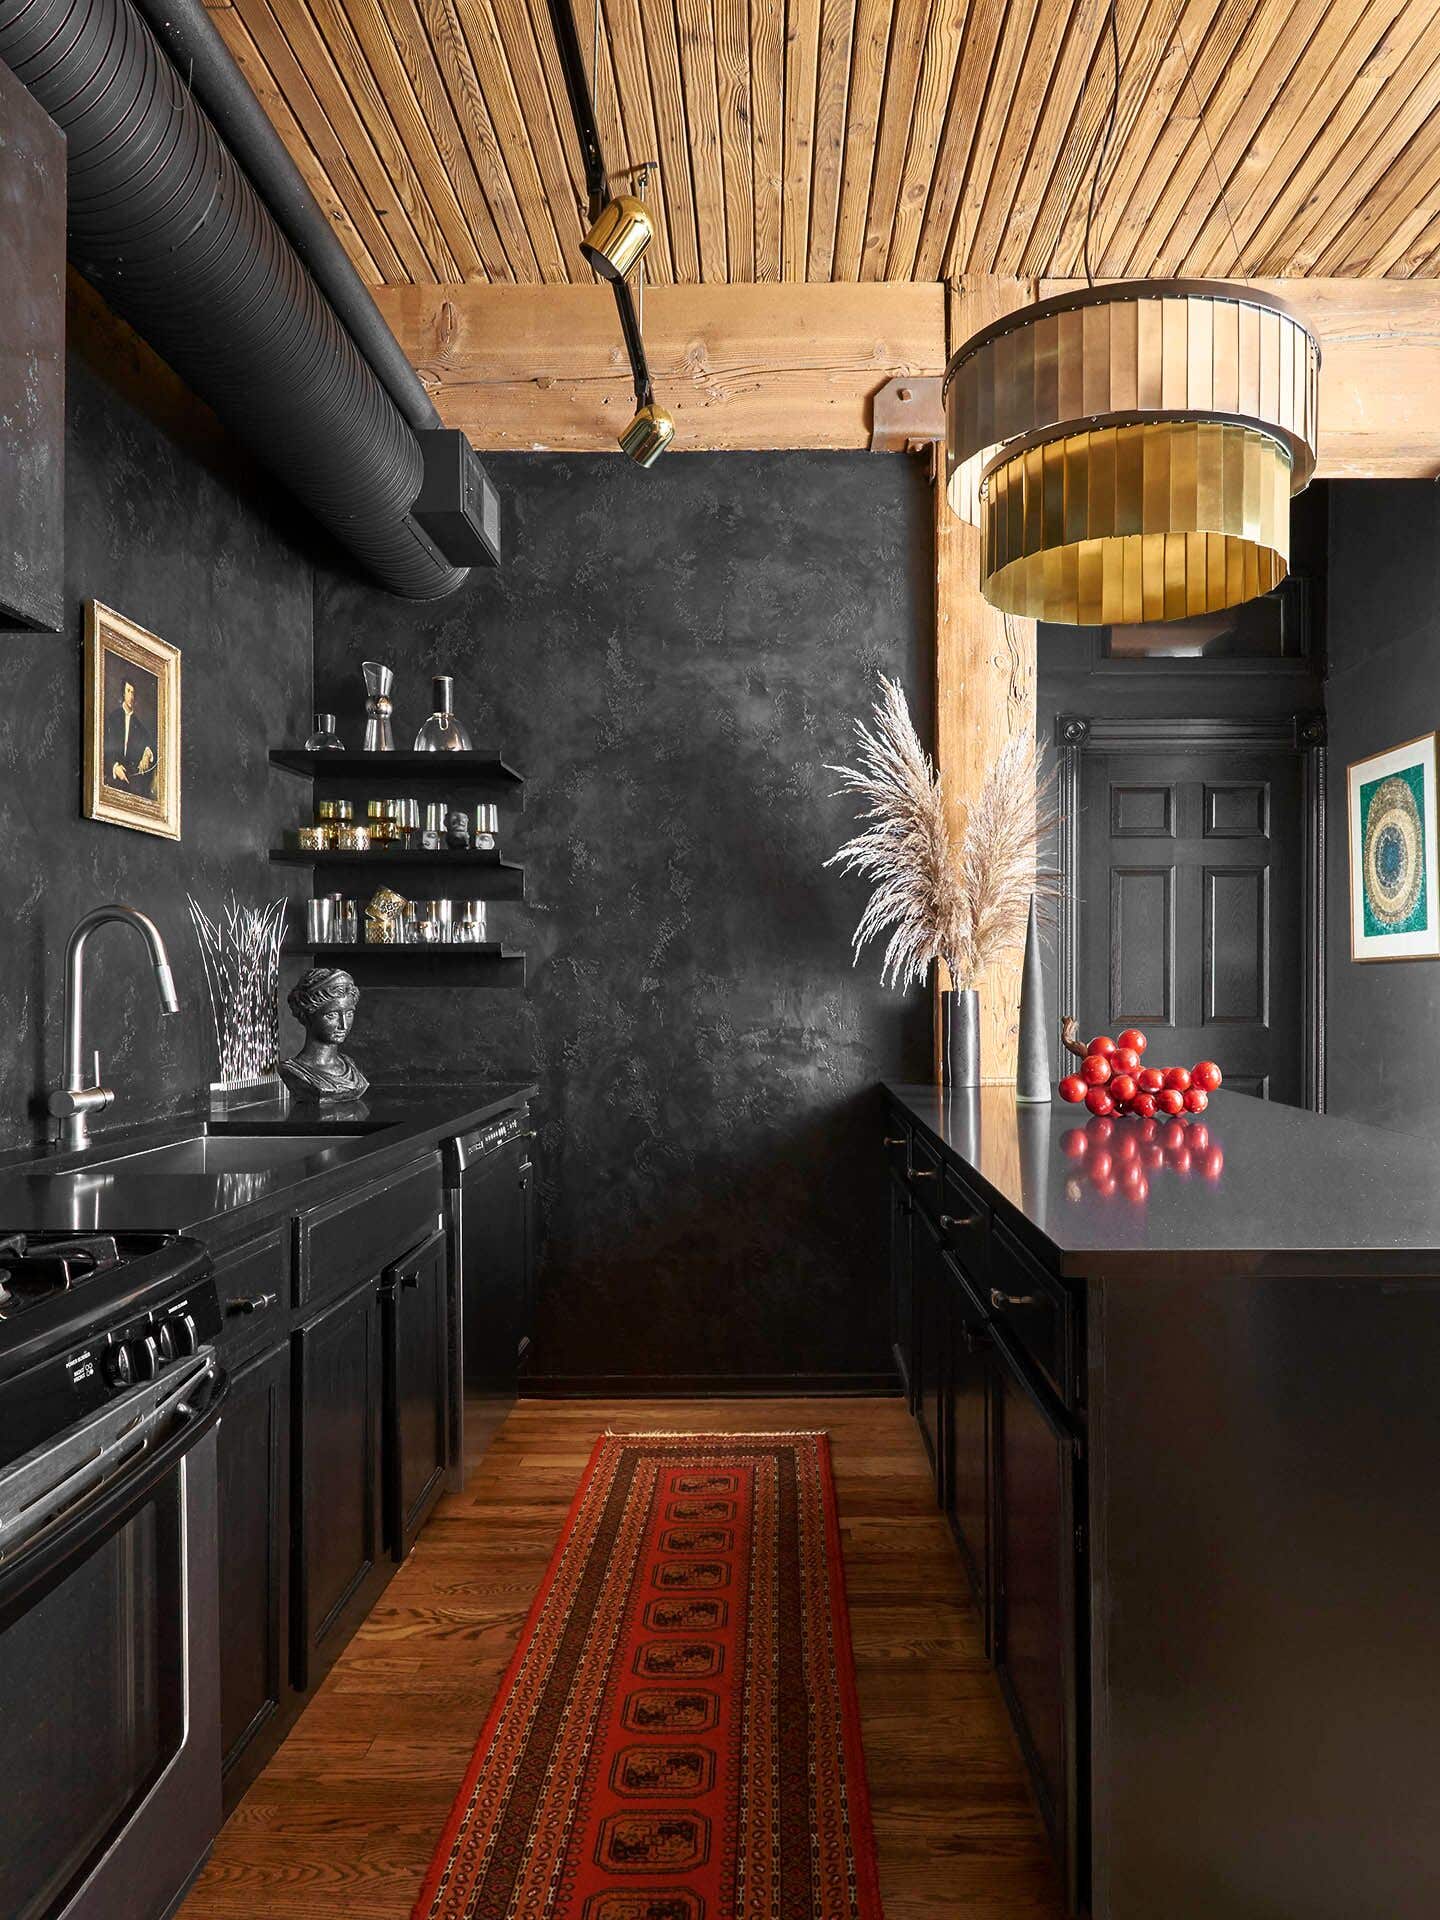 You’d Never Know This Dramatic Kitchen Was Done on a Tight Budget